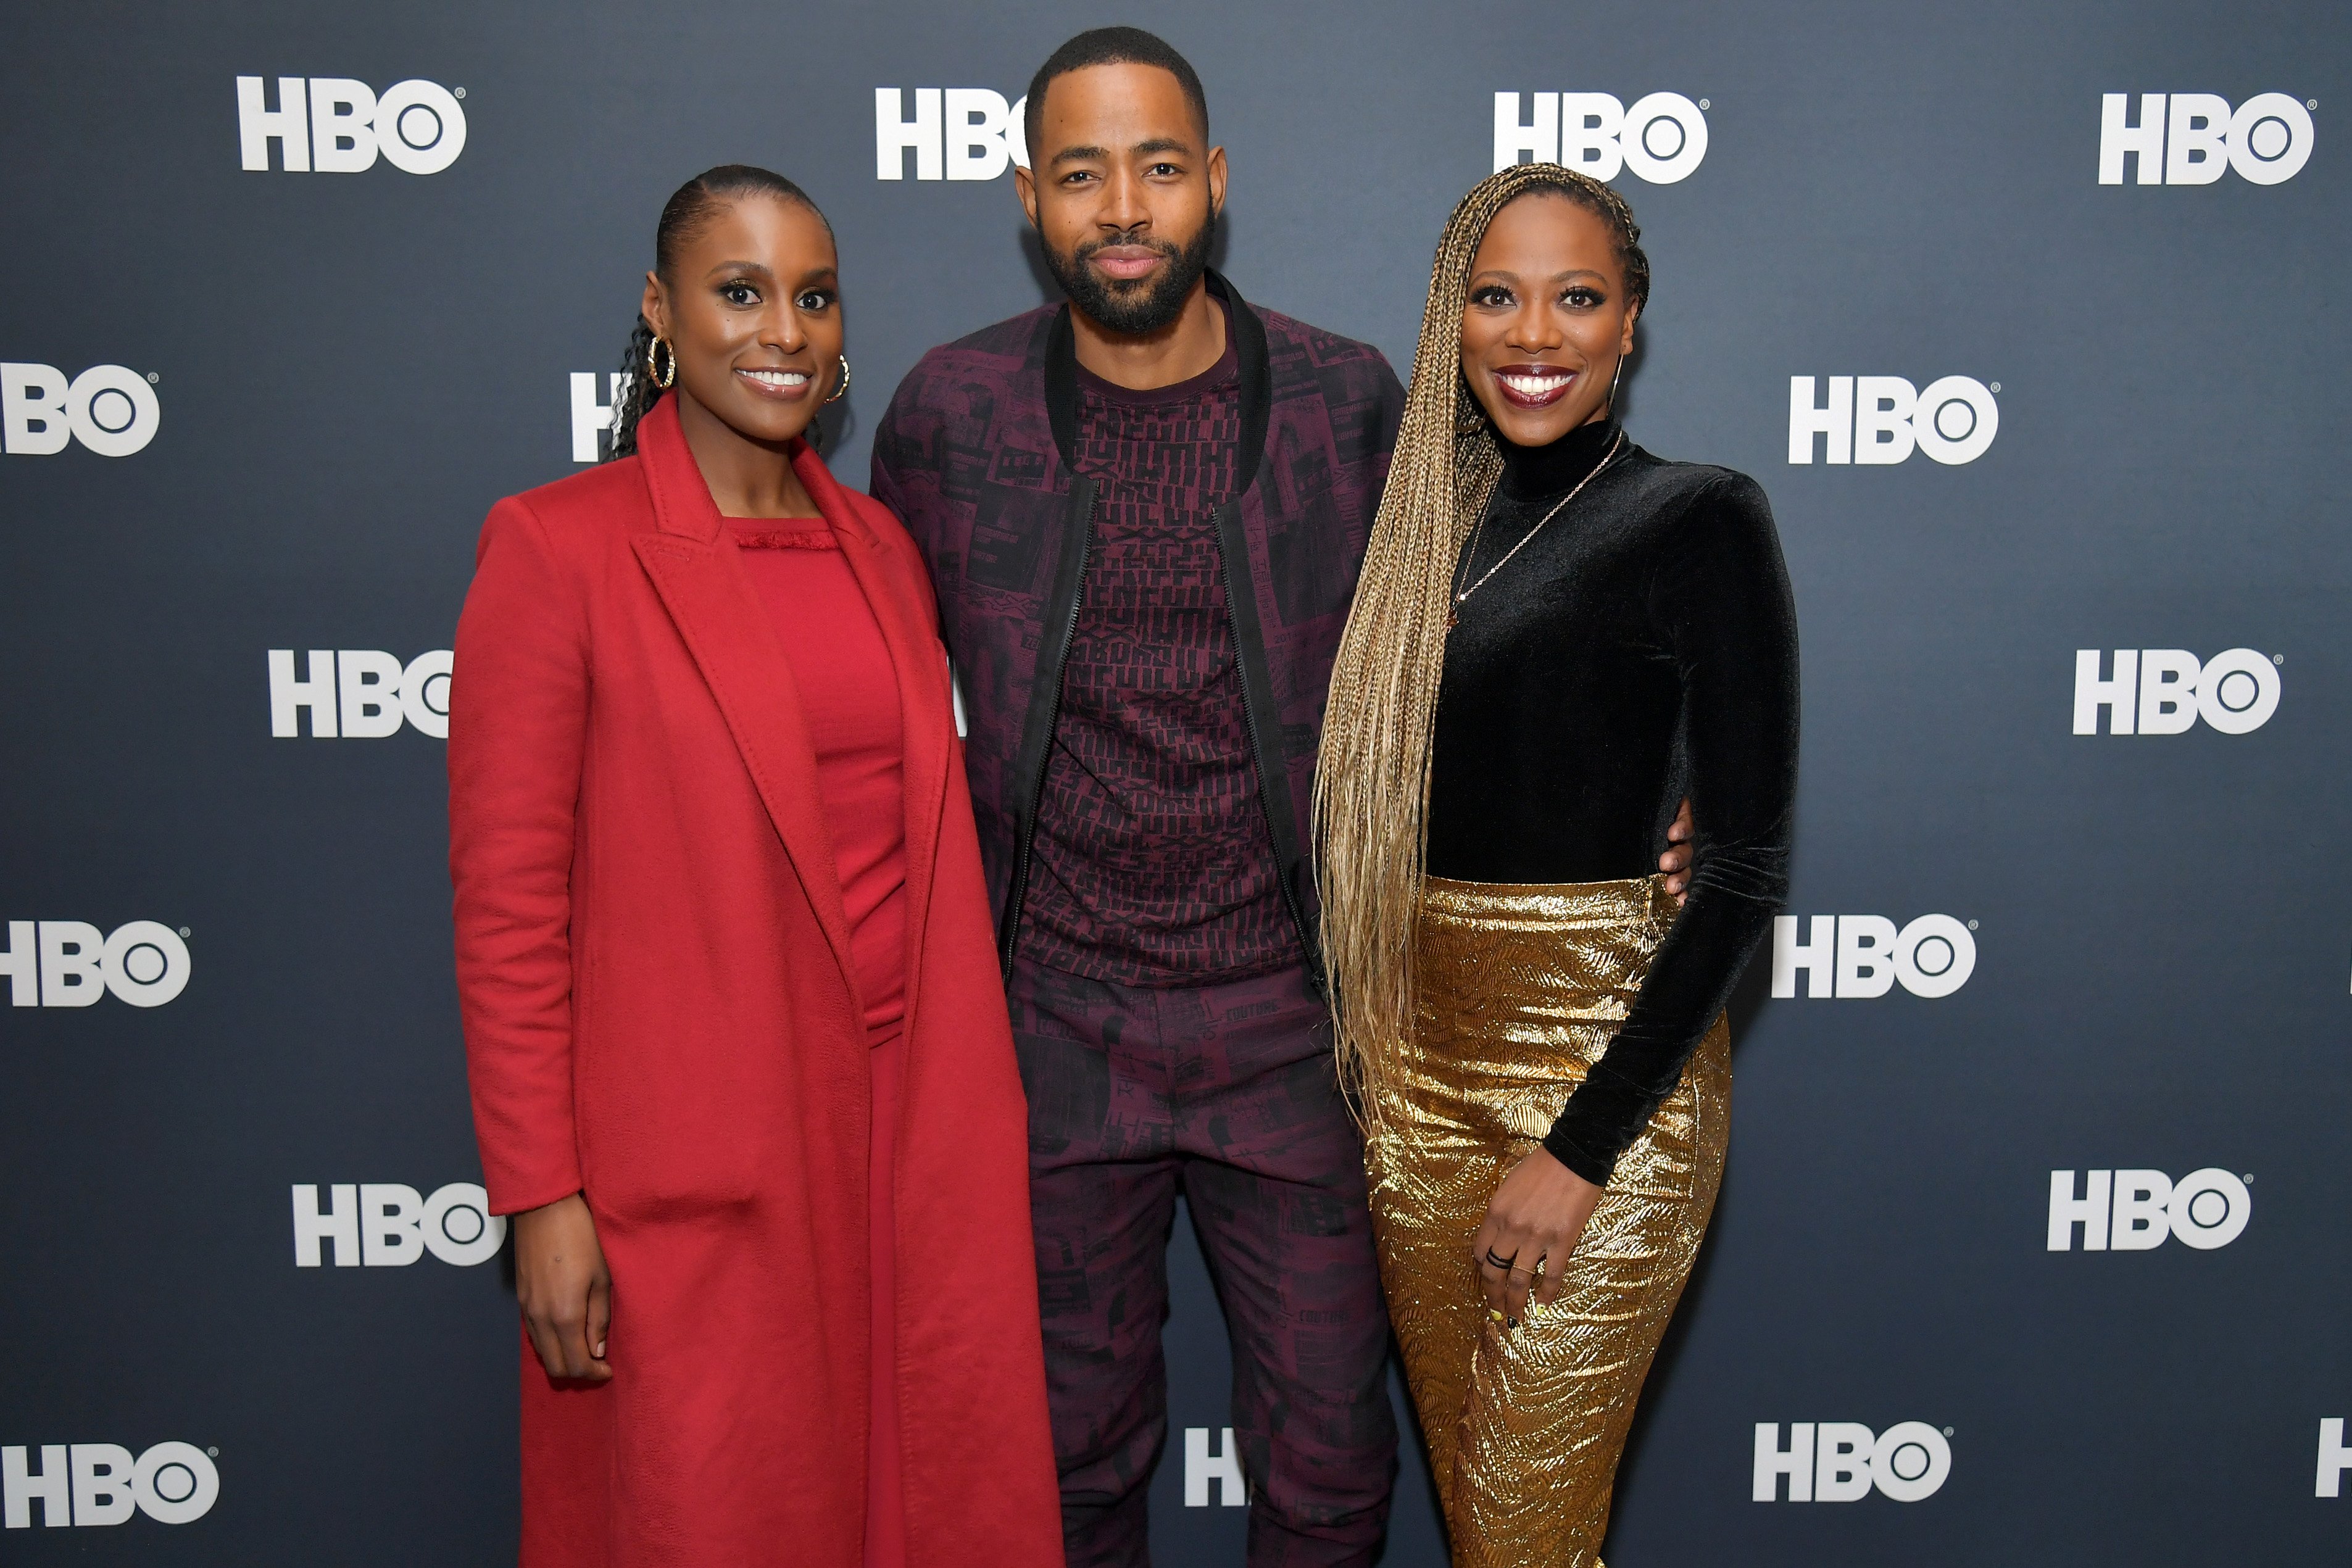 Issa Rae, Jay Ellis, and Yvonne Orji at an HBO event in January 2020